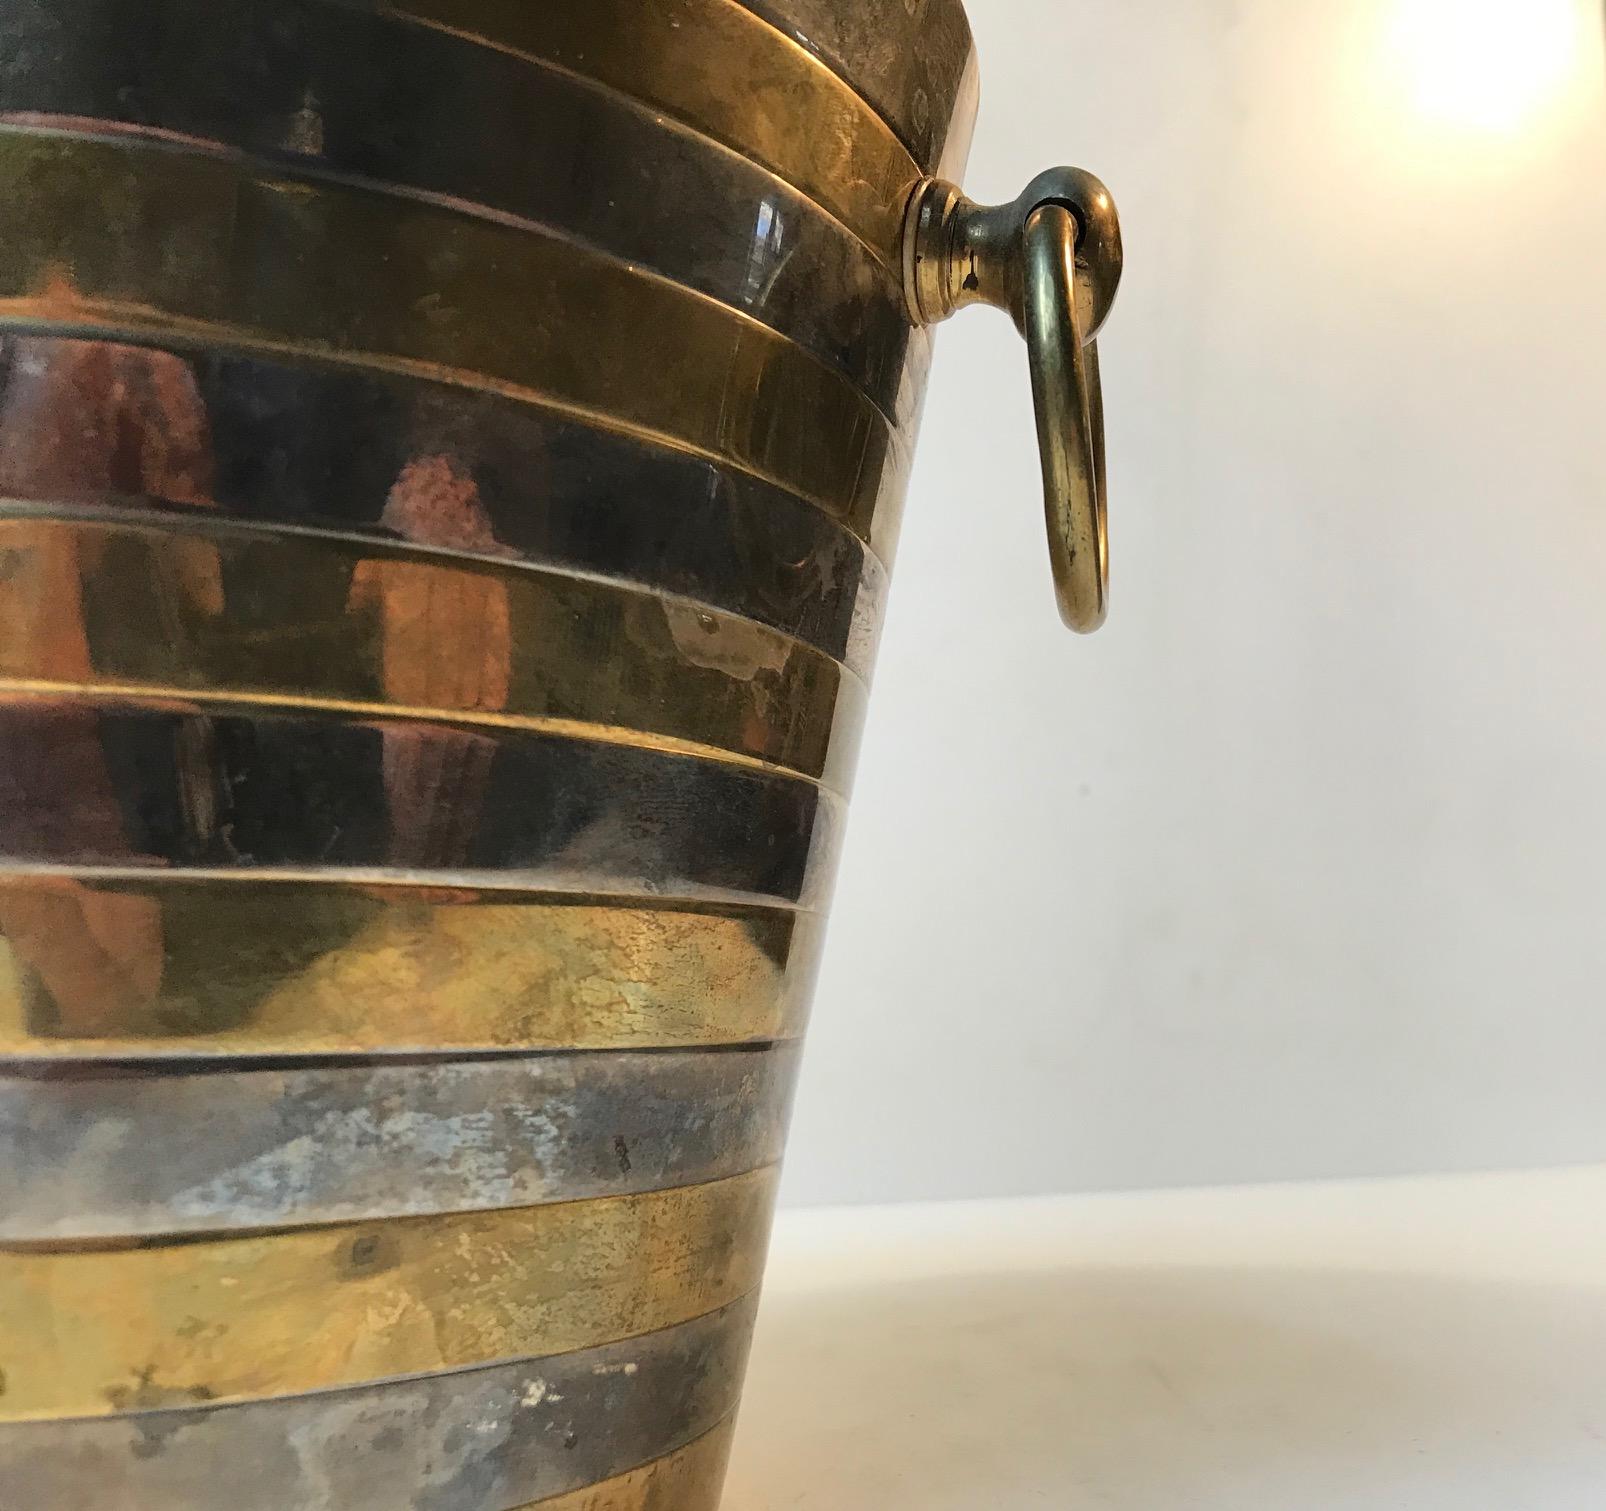 Stylish Champagne ice bucket fashioned out of brass and silver plated brass. It came from a Hotel in Göteborg, Sweden and was manufactured in Scandinavia during the 1950s or 1960s. The style of this piece is reminiscent of Georg Jensen. On request